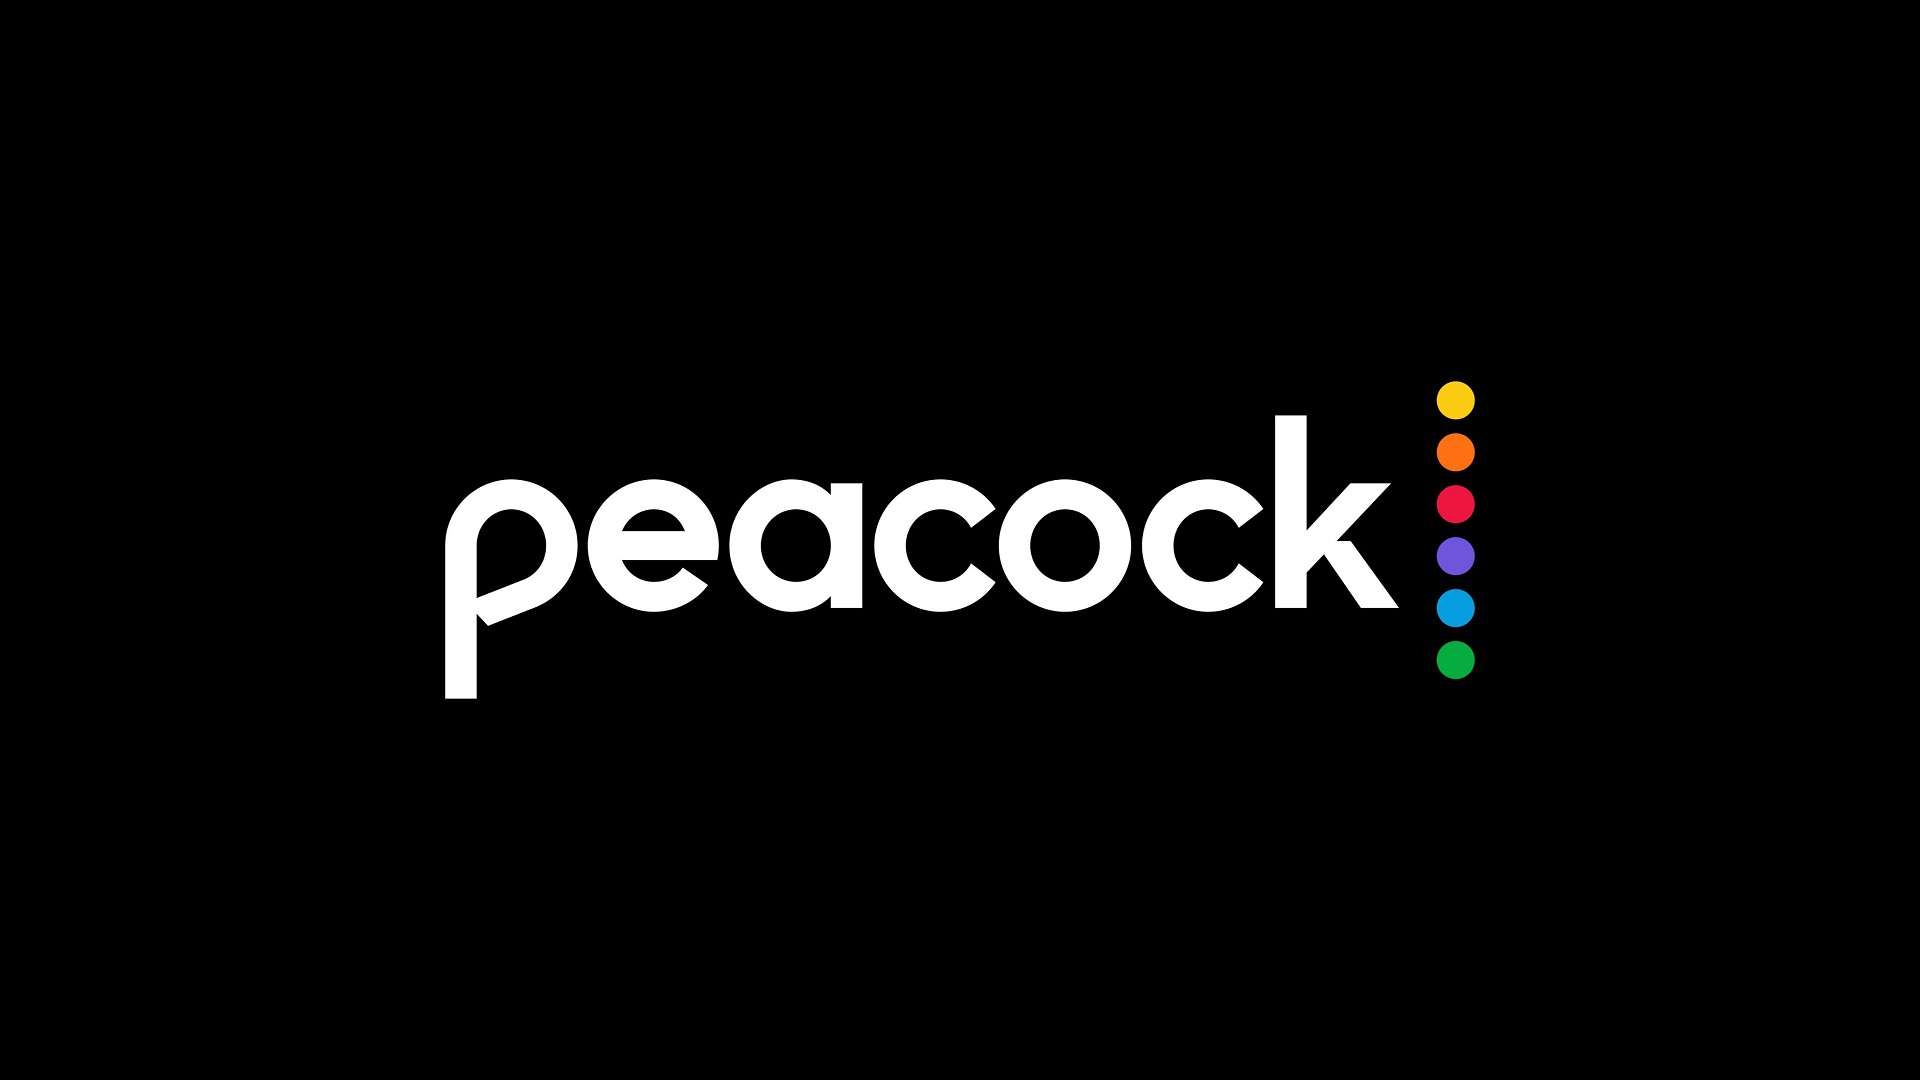 Top 10 Best Movies on Peacock in April 2021